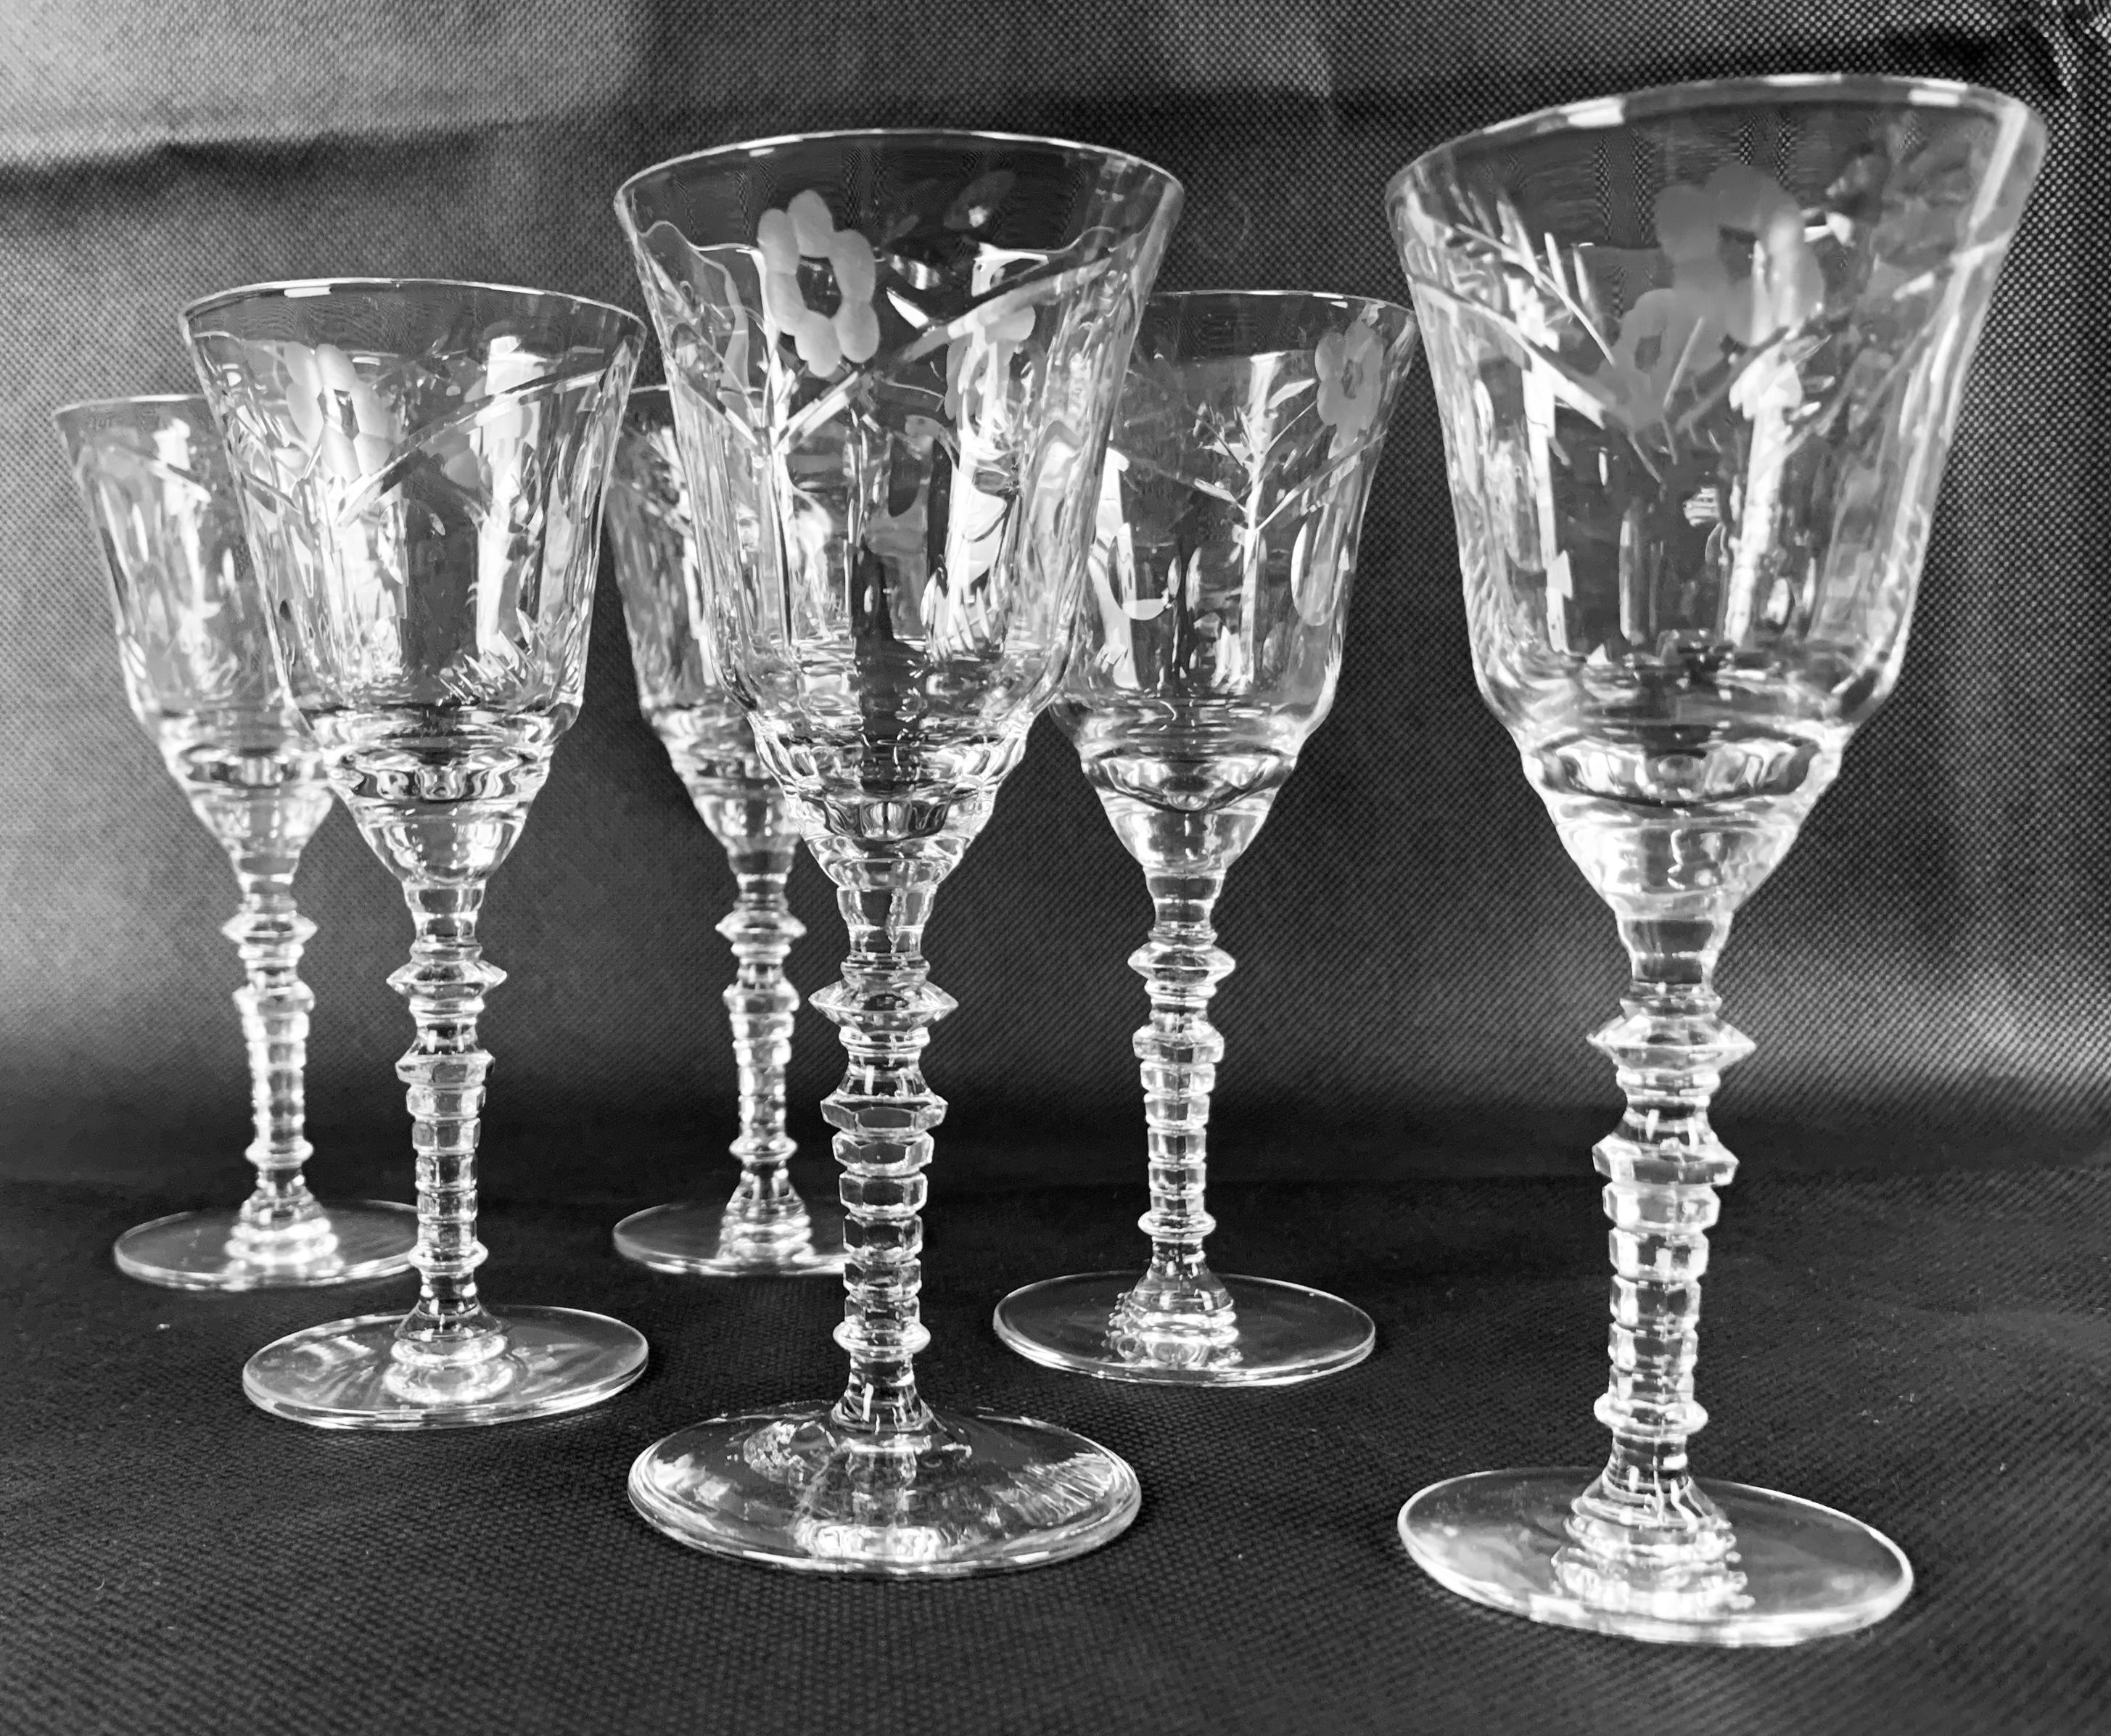 If you were invited to a cocktail party during the 1940s you might have been served a cordial in these glasses.  They were made by Rock Sharpe in the 